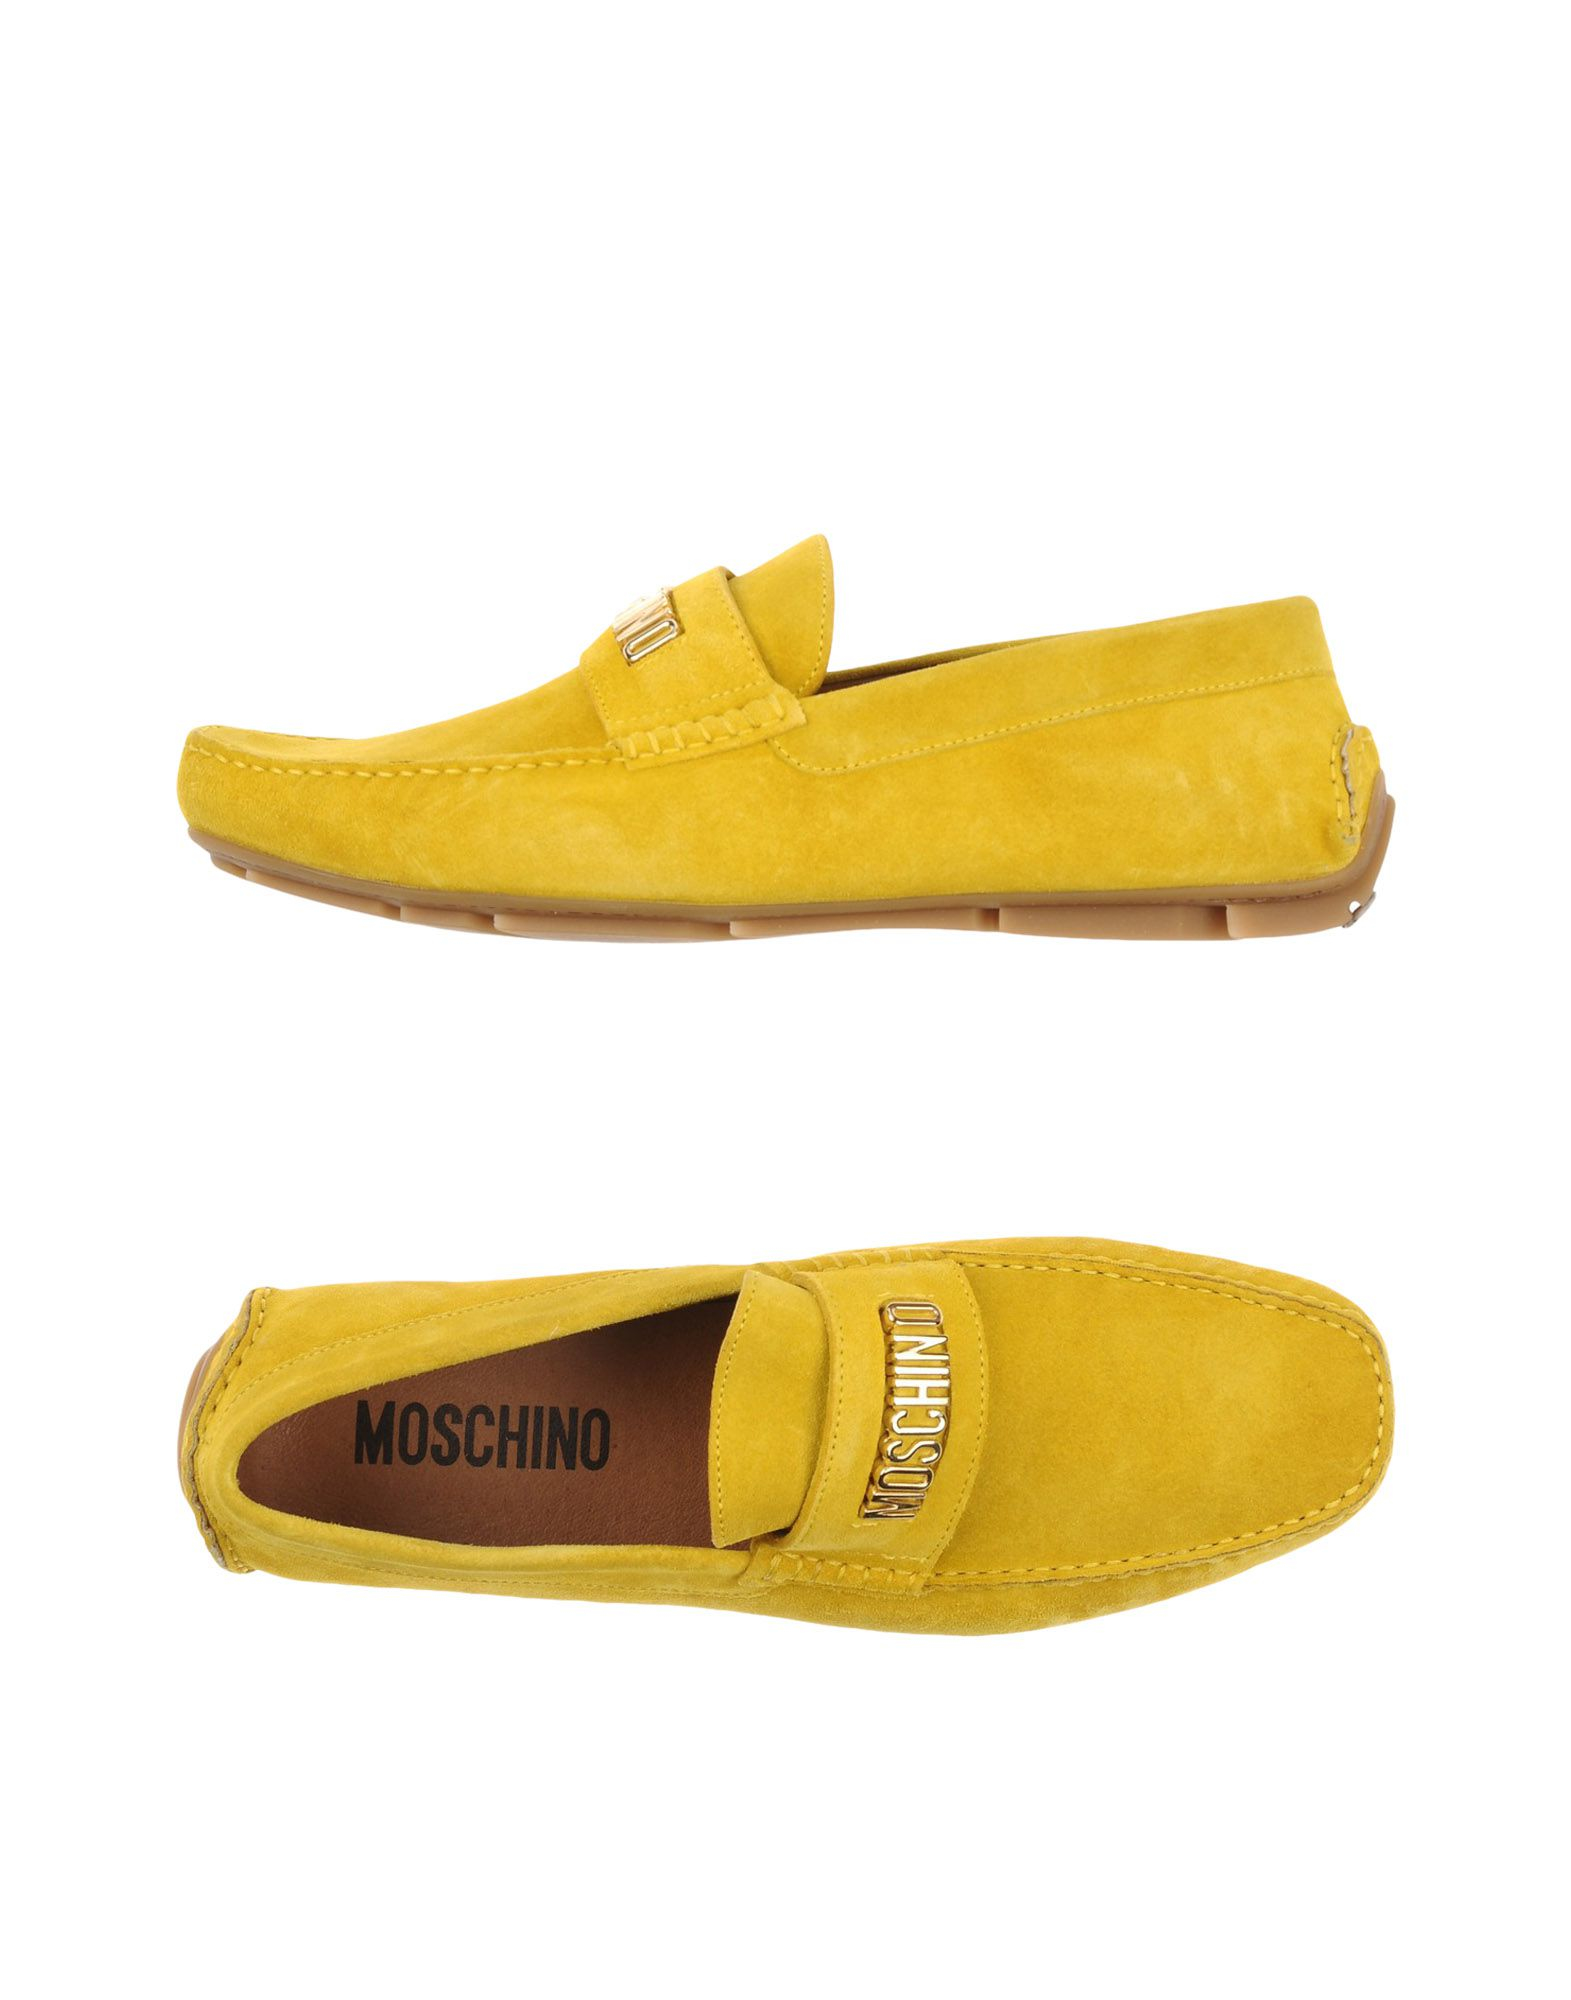 Lyst - Moschino Moccasins in Yellow for Men